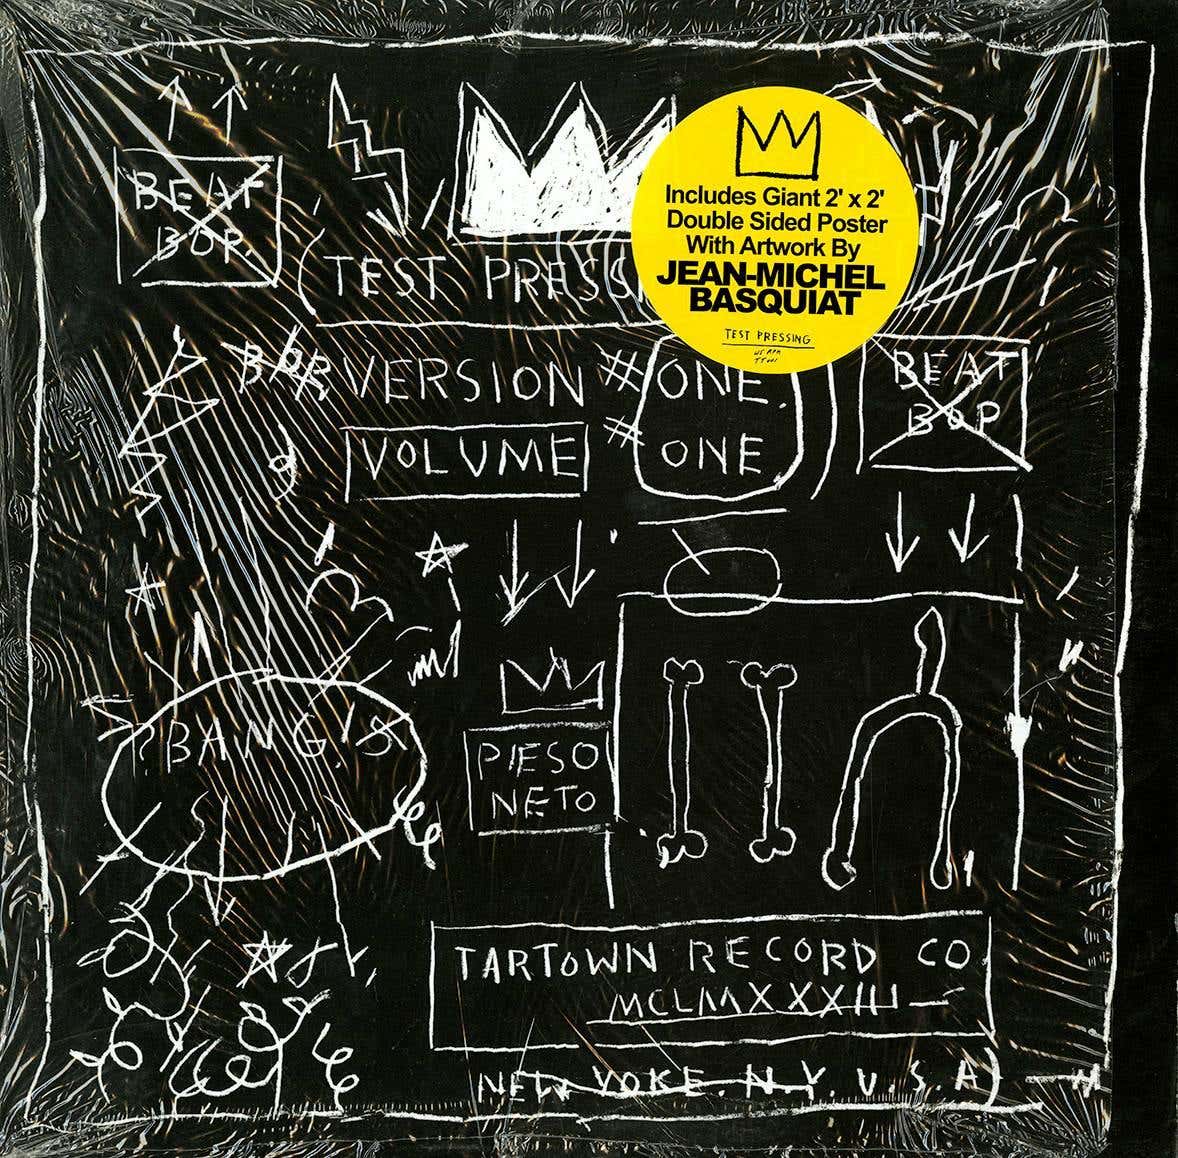 after Jean-Michel Basquiat - Basquiat Beat Bop record art and poster at ...